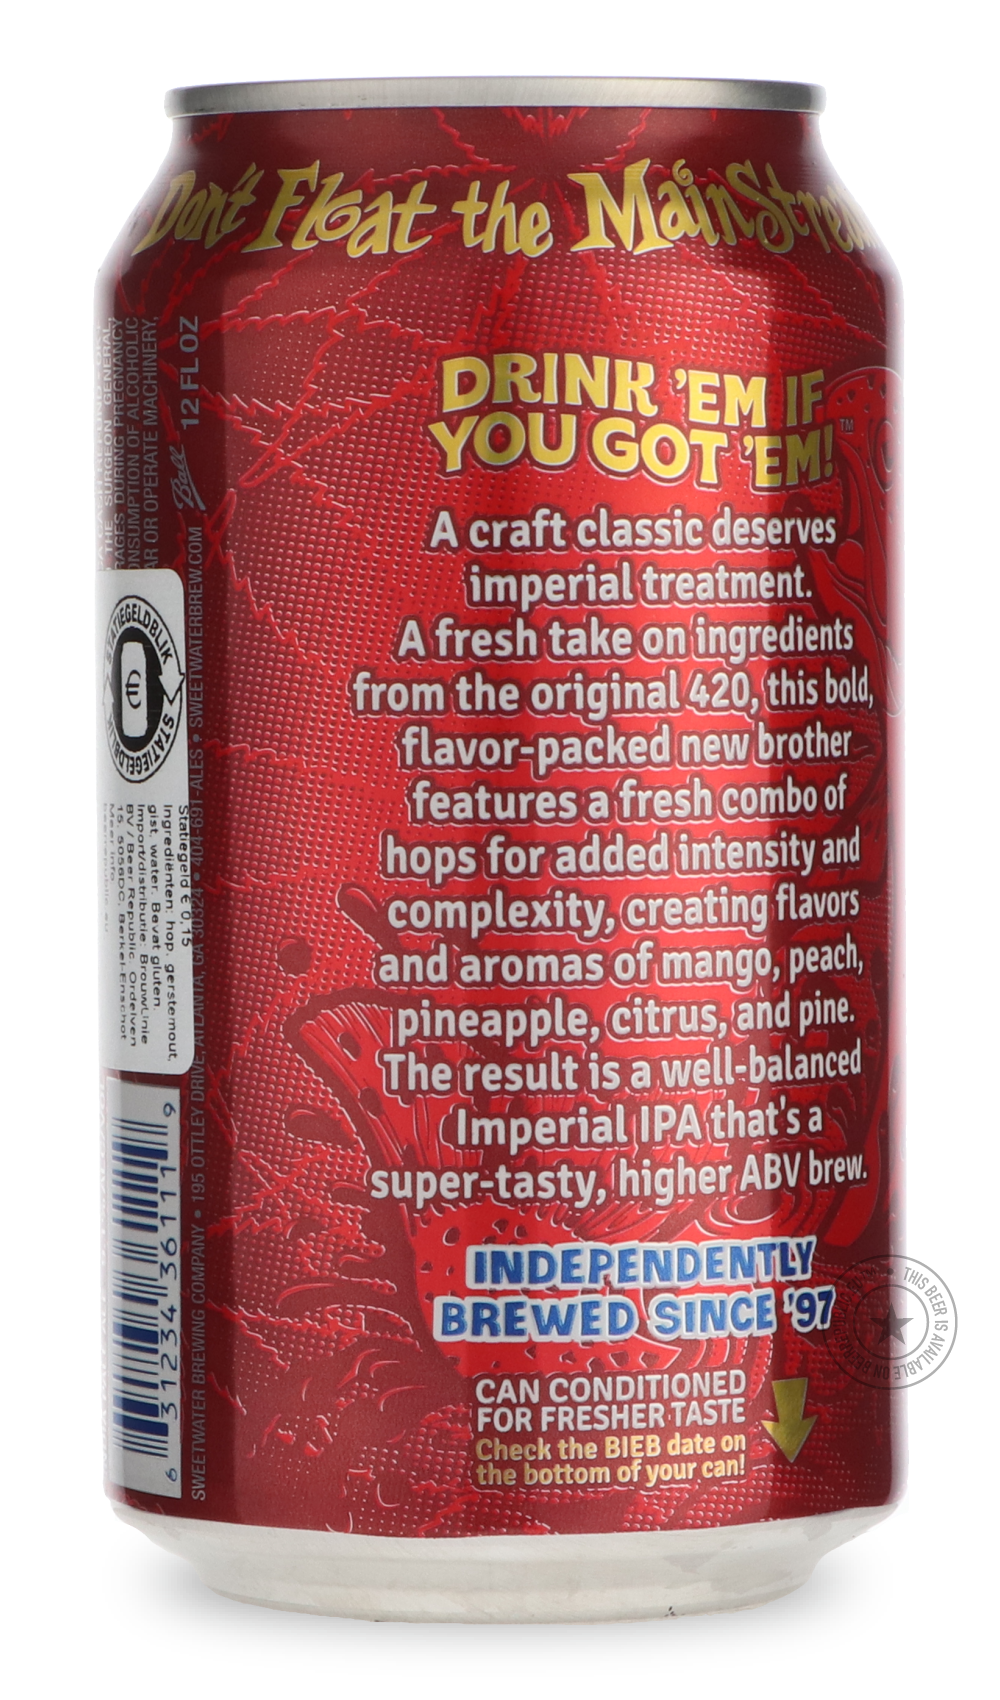 -SweetWater- 420 Imperial IPA-IPA- Only @ Beer Republic - The best online beer store for American & Canadian craft beer - Buy beer online from the USA and Canada - Bier online kopen - Amerikaans bier kopen - Craft beer store - Craft beer kopen - Amerikanisch bier kaufen - Bier online kaufen - Acheter biere online - IPA - Stout - Porter - New England IPA - Hazy IPA - Imperial Stout - Barrel Aged - Barrel Aged Imperial Stout - Brown - Dark beer - Blond - Blonde - Pilsner - Lager - Wheat - Weizen - Amber - Bar